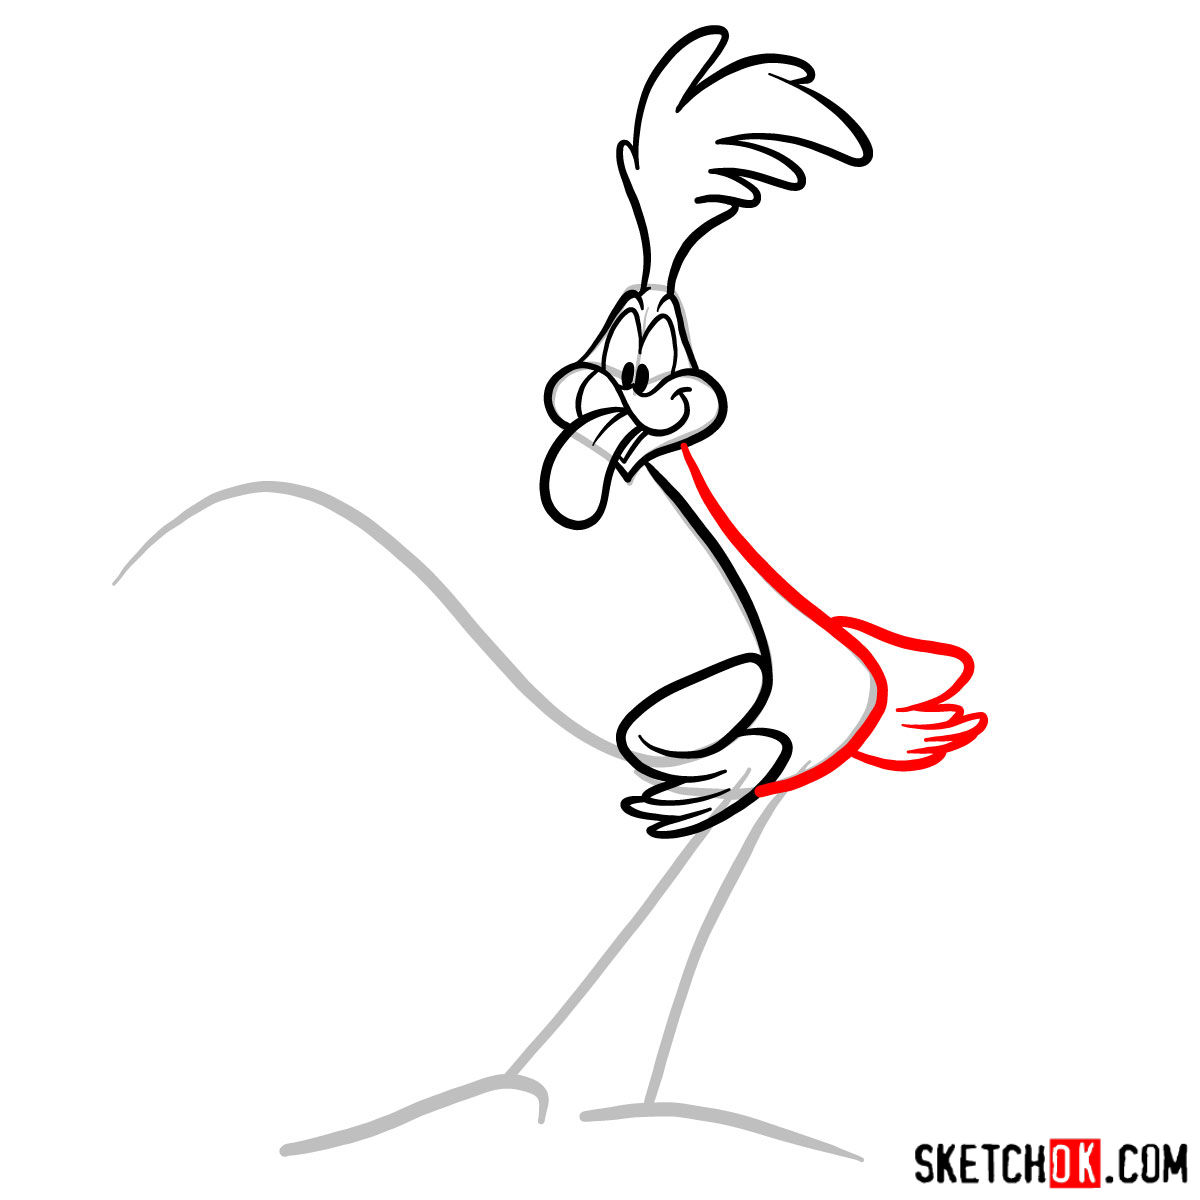 How to draw the Road Runner - step 05